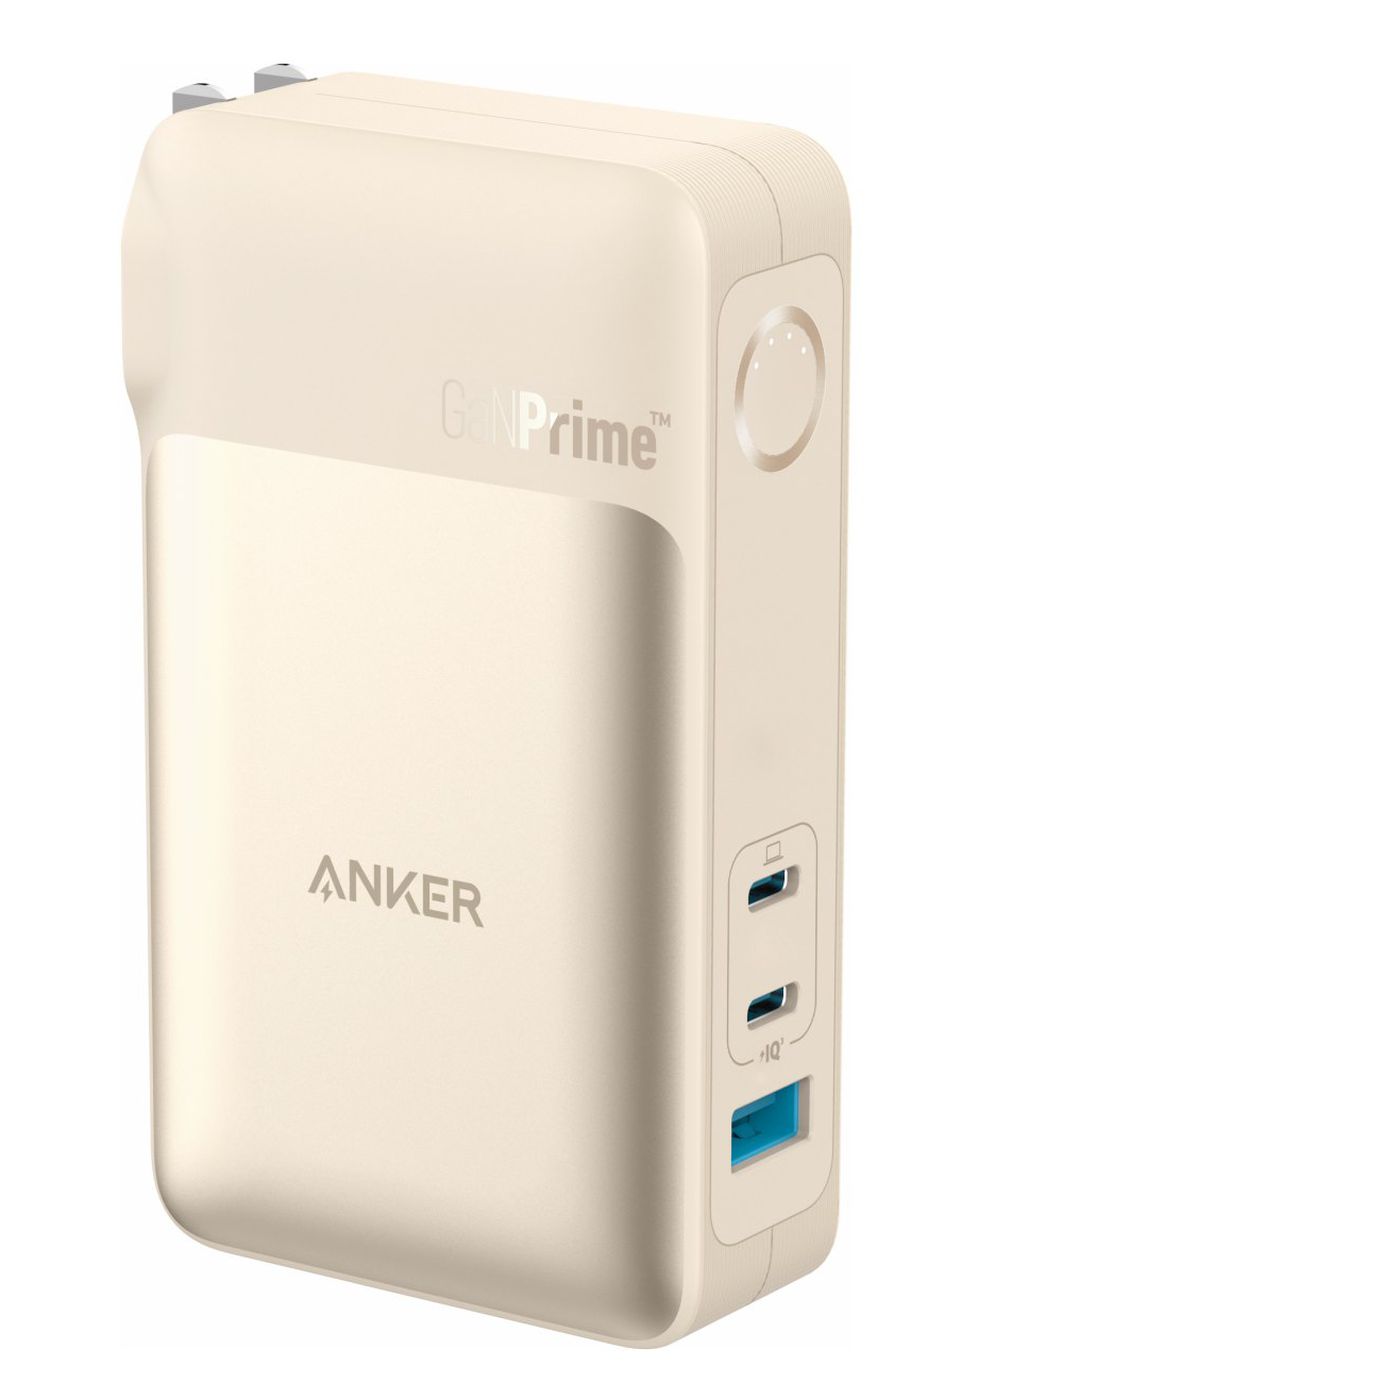 Anker's new GaNPrime chargers are iterative upgrades to its lineup 